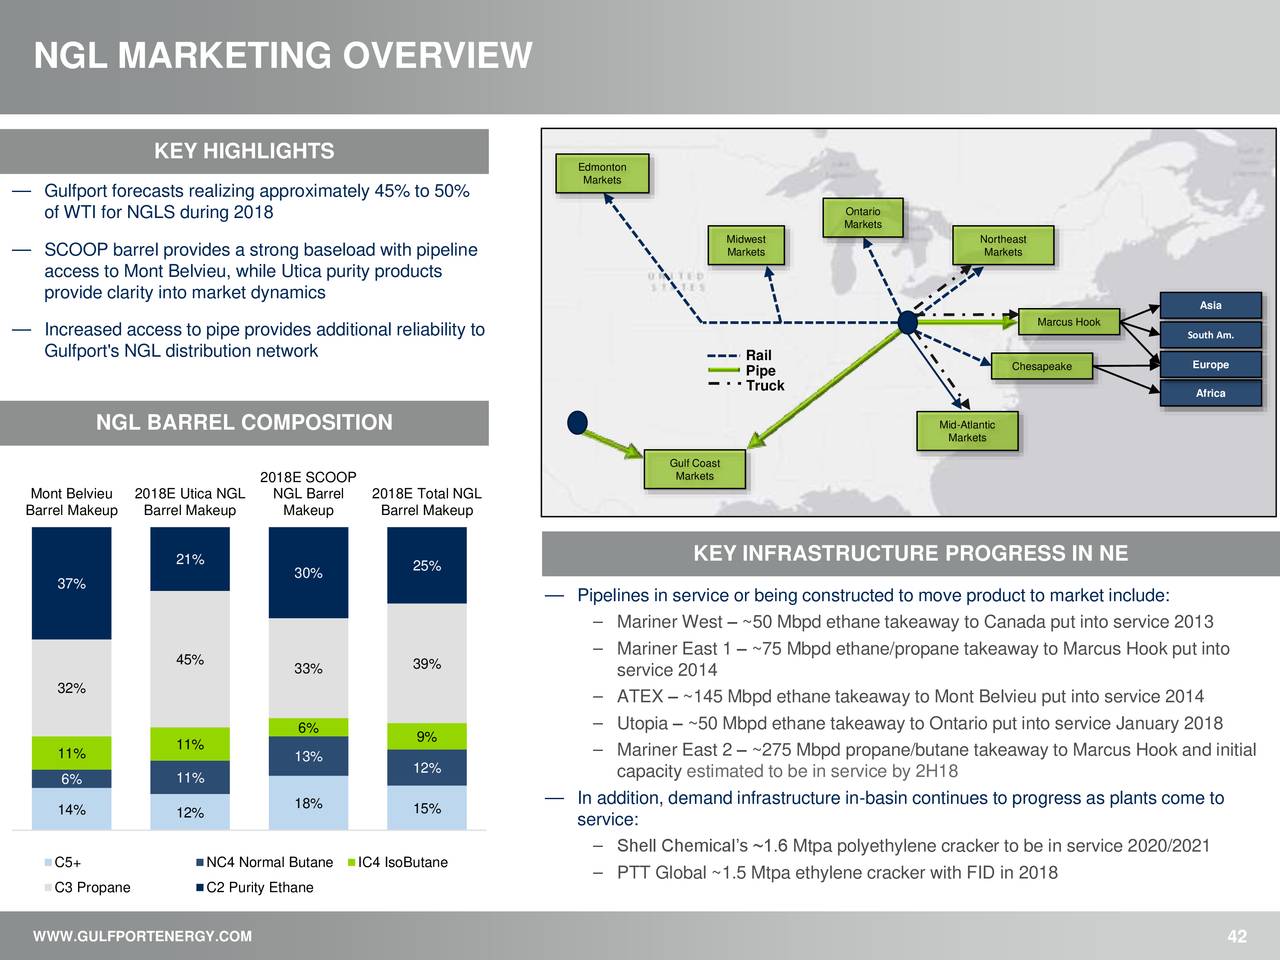 NGL MARKETING OVERVIEW